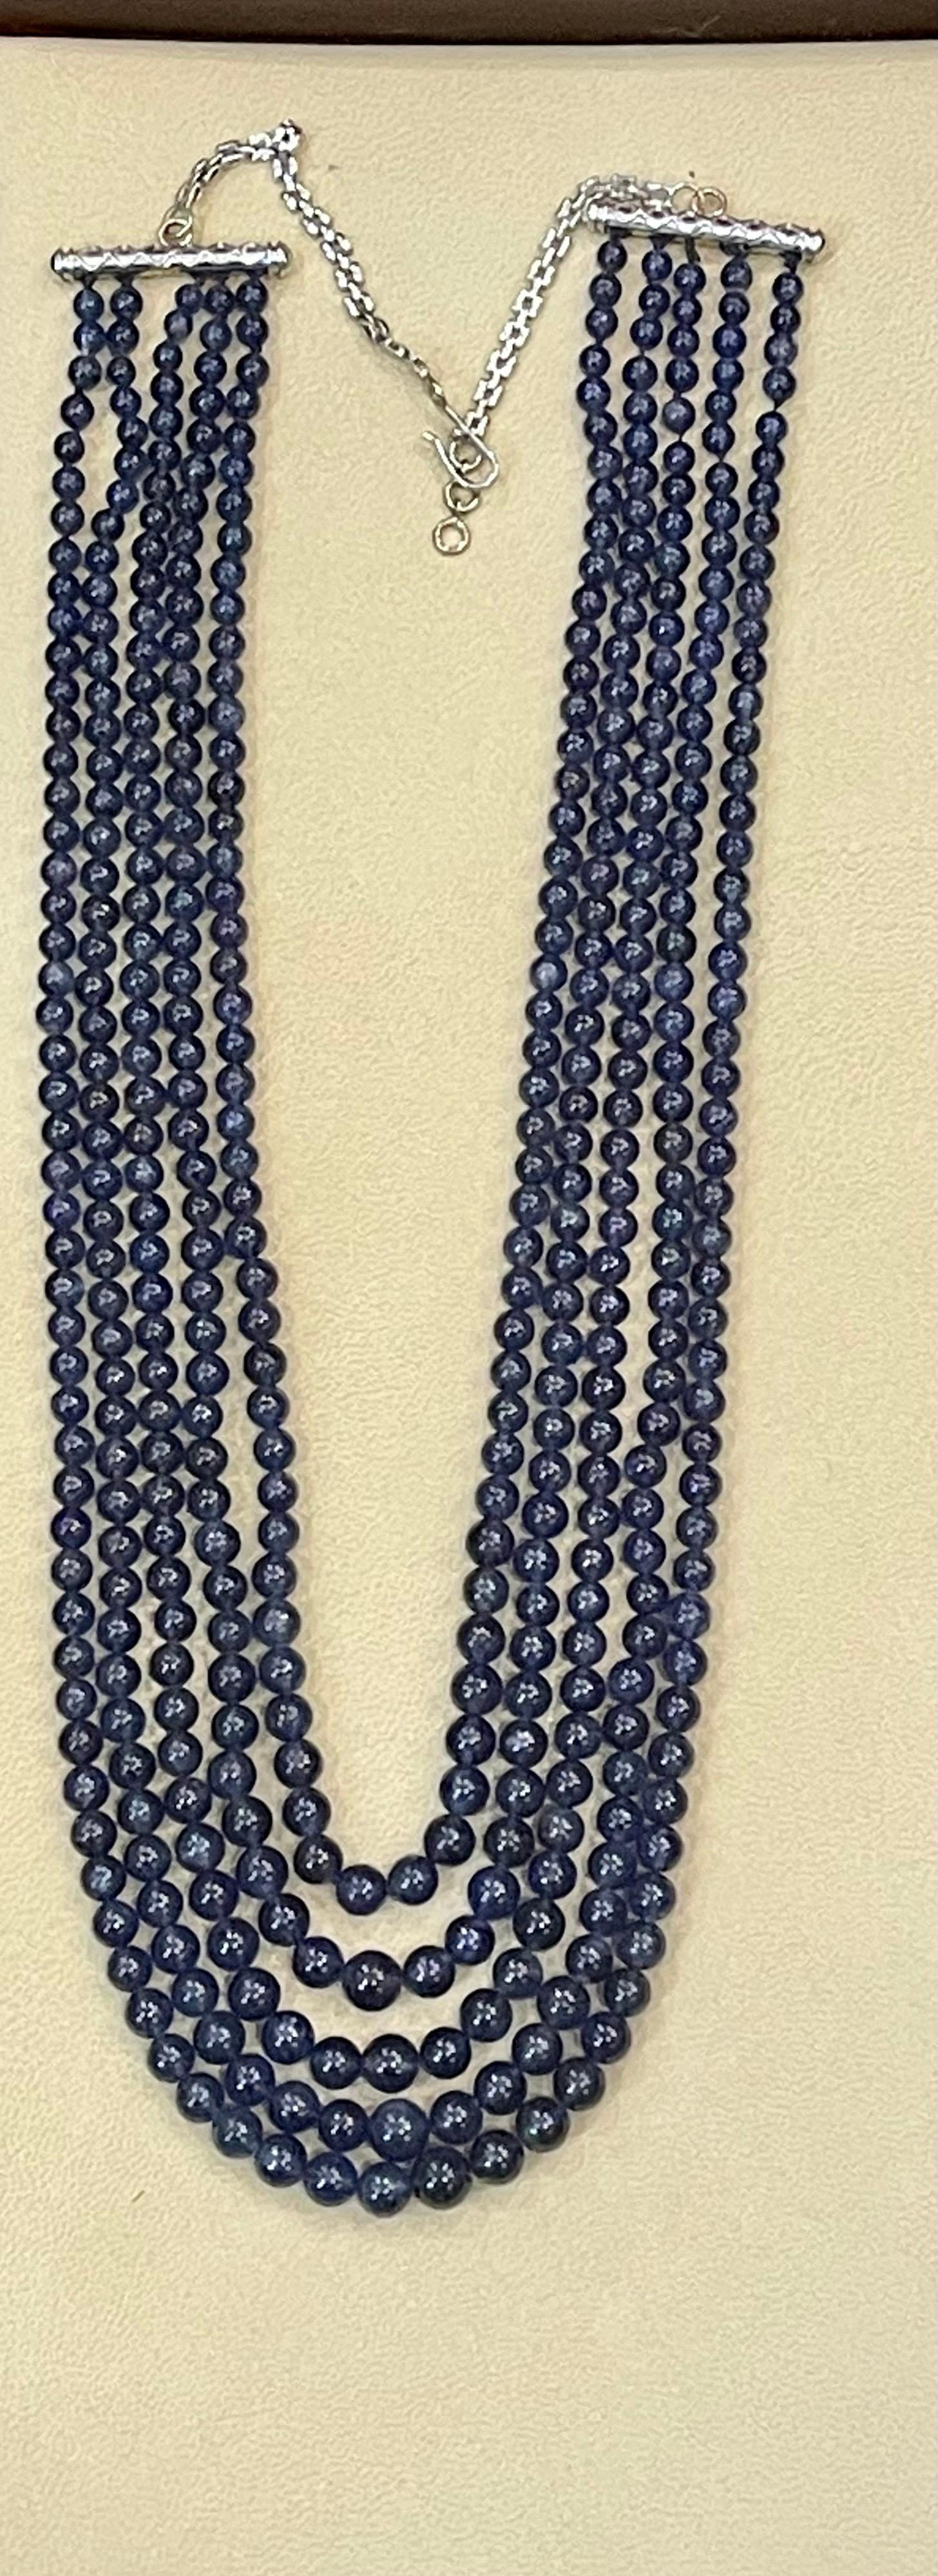 Smooth 800 Carat Natural Tanzanite Bead Five Strand Necklace 14 Karat White Gold In Excellent Condition For Sale In New York, NY